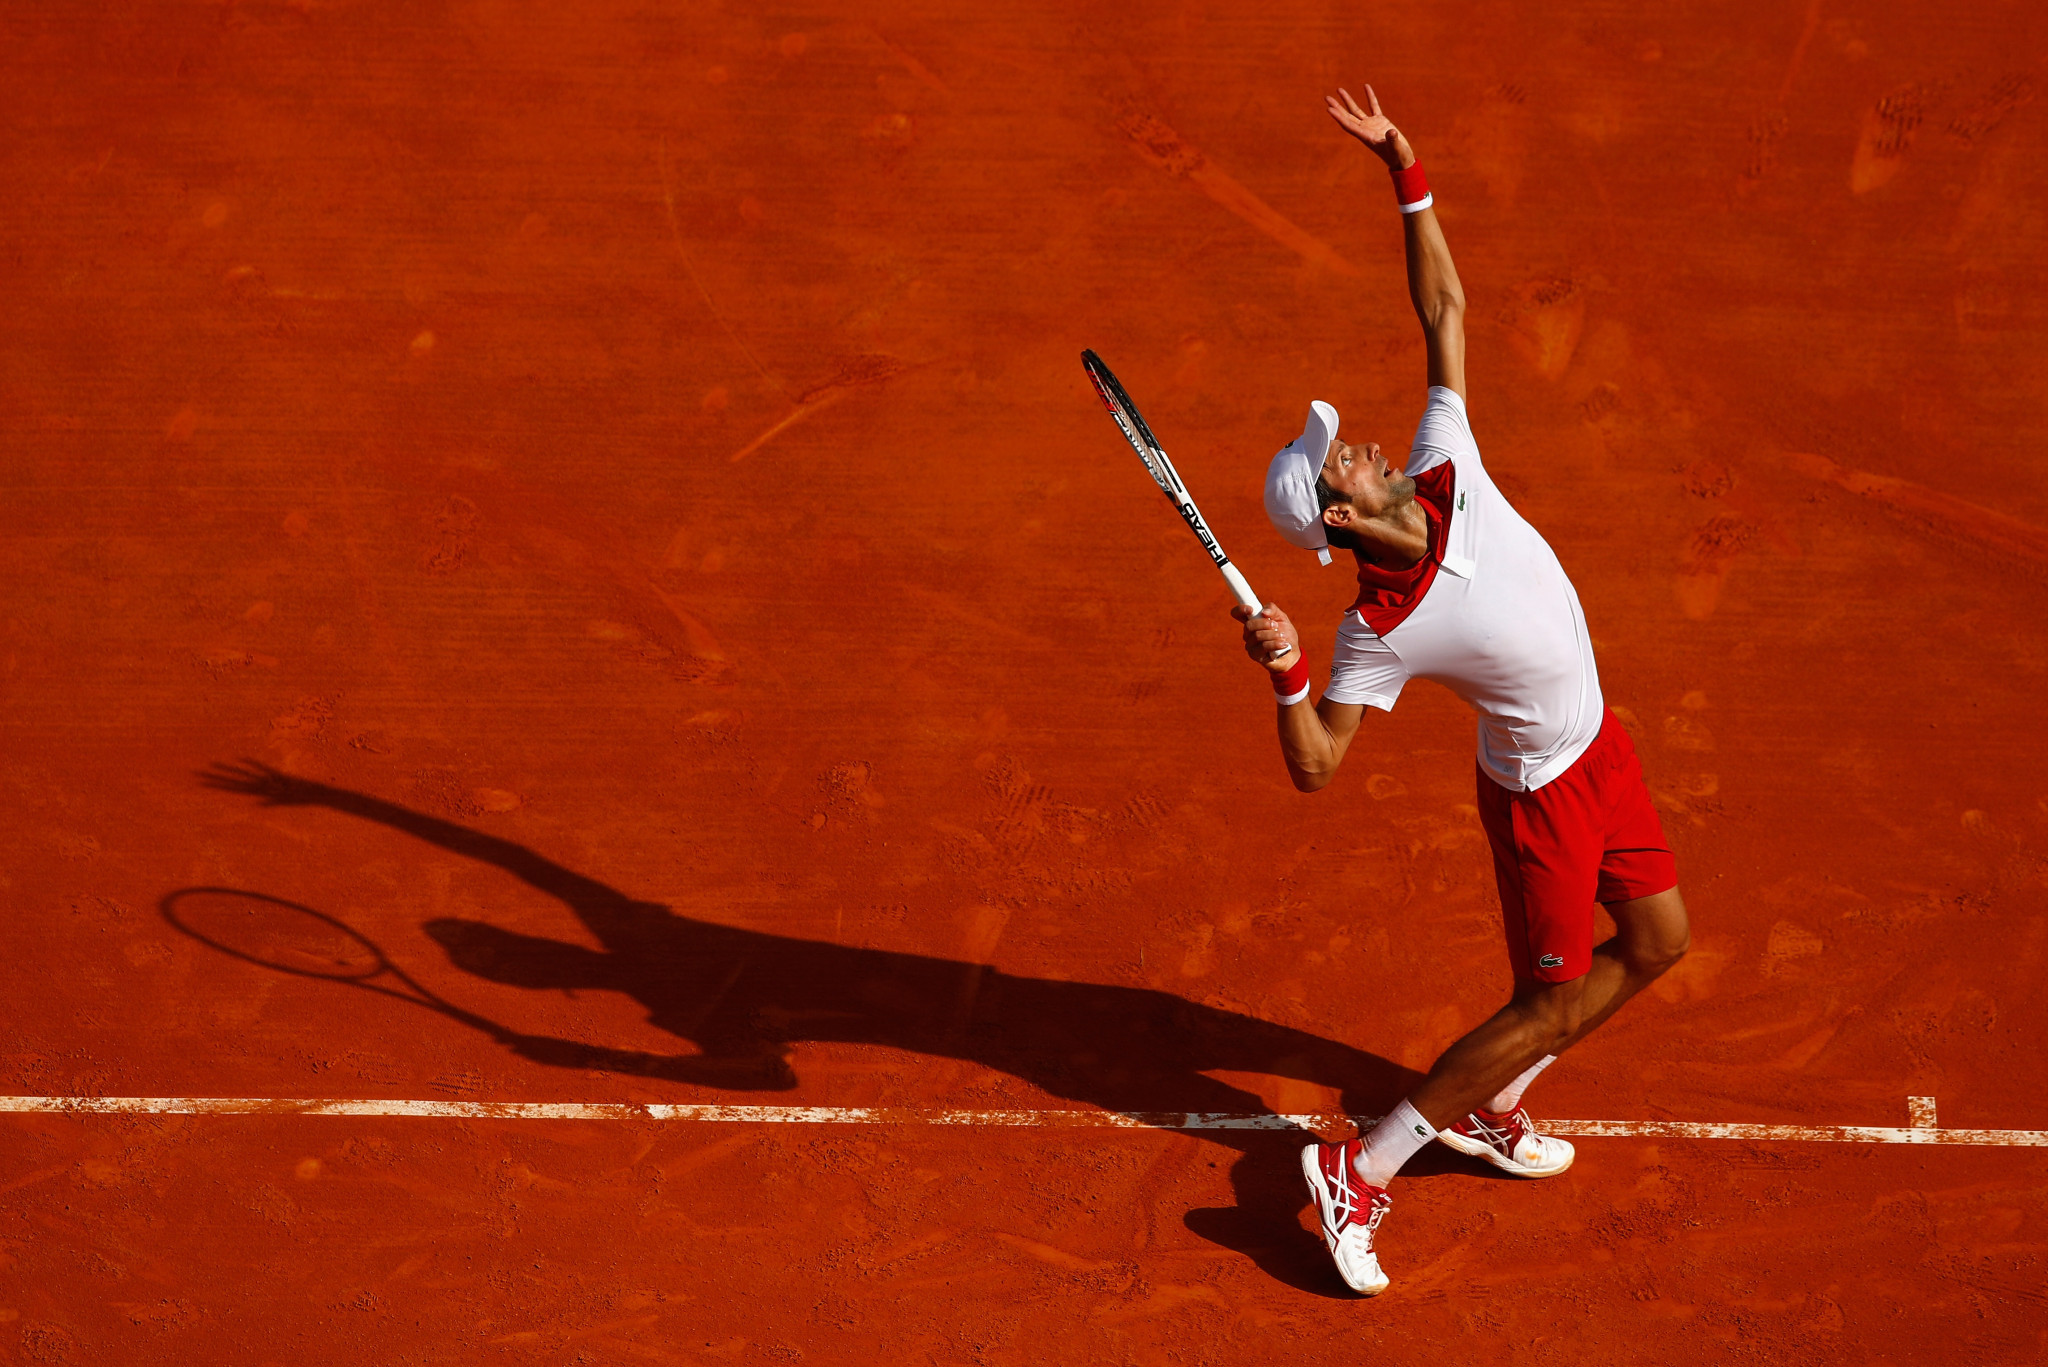 Novak Djokovic en route to his first win in three months at the Monte Carlo Open today ©Getty Images